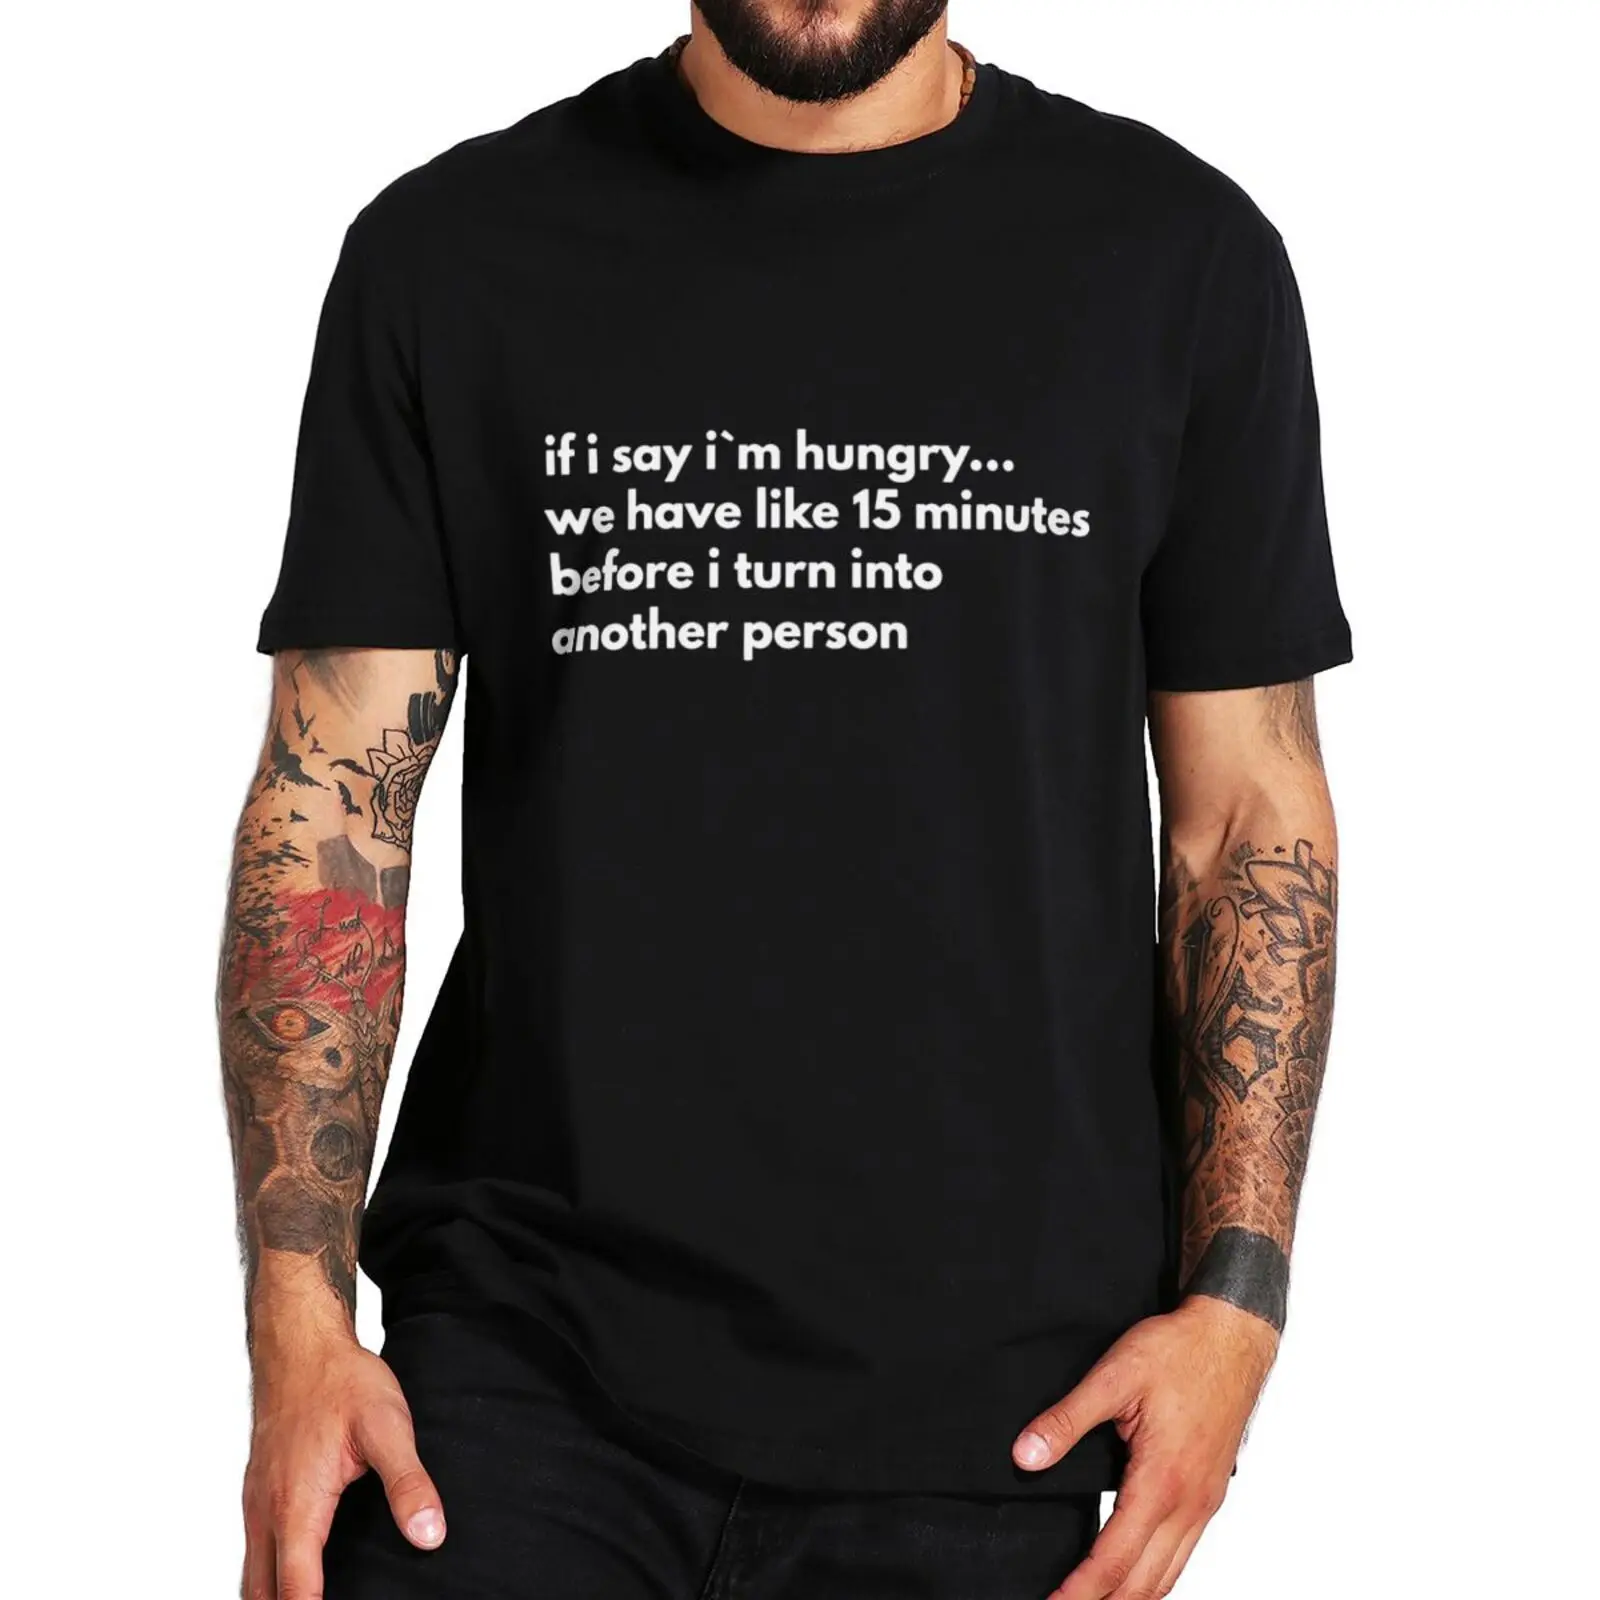 

If I Say I'm Hungry We Have Like 15 Minutes Before I Turn Into Another Person T Shirt Adult Humor Funny Tee Cotton Casual Tshirt